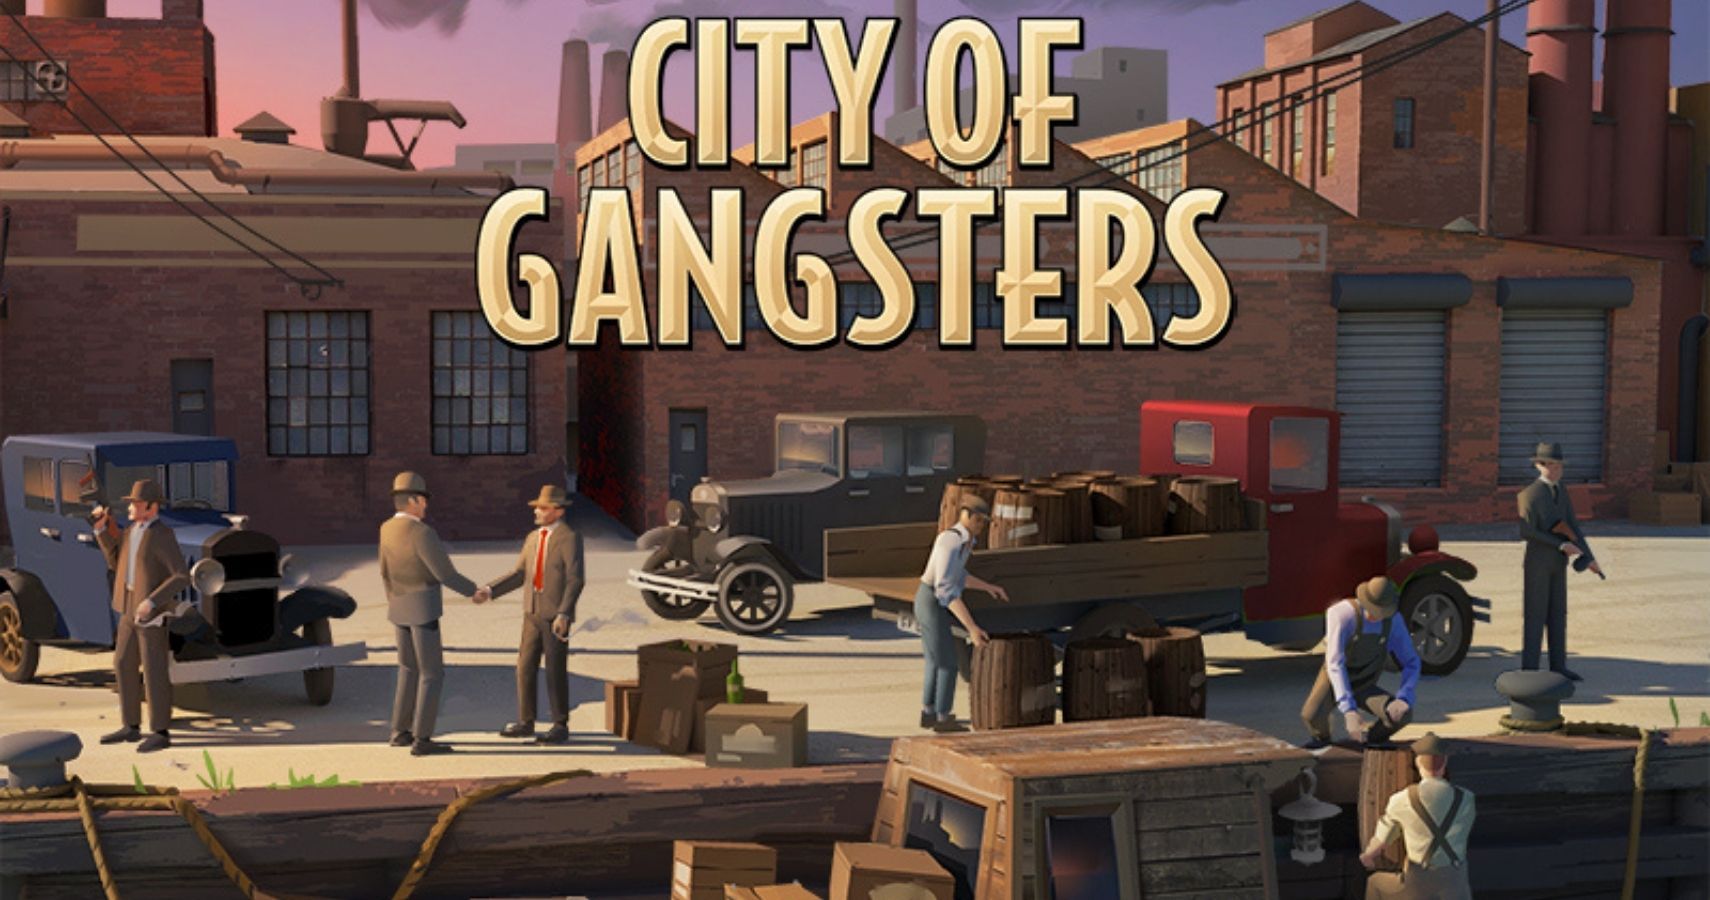 City of Gangsters Supply and Demand feature image